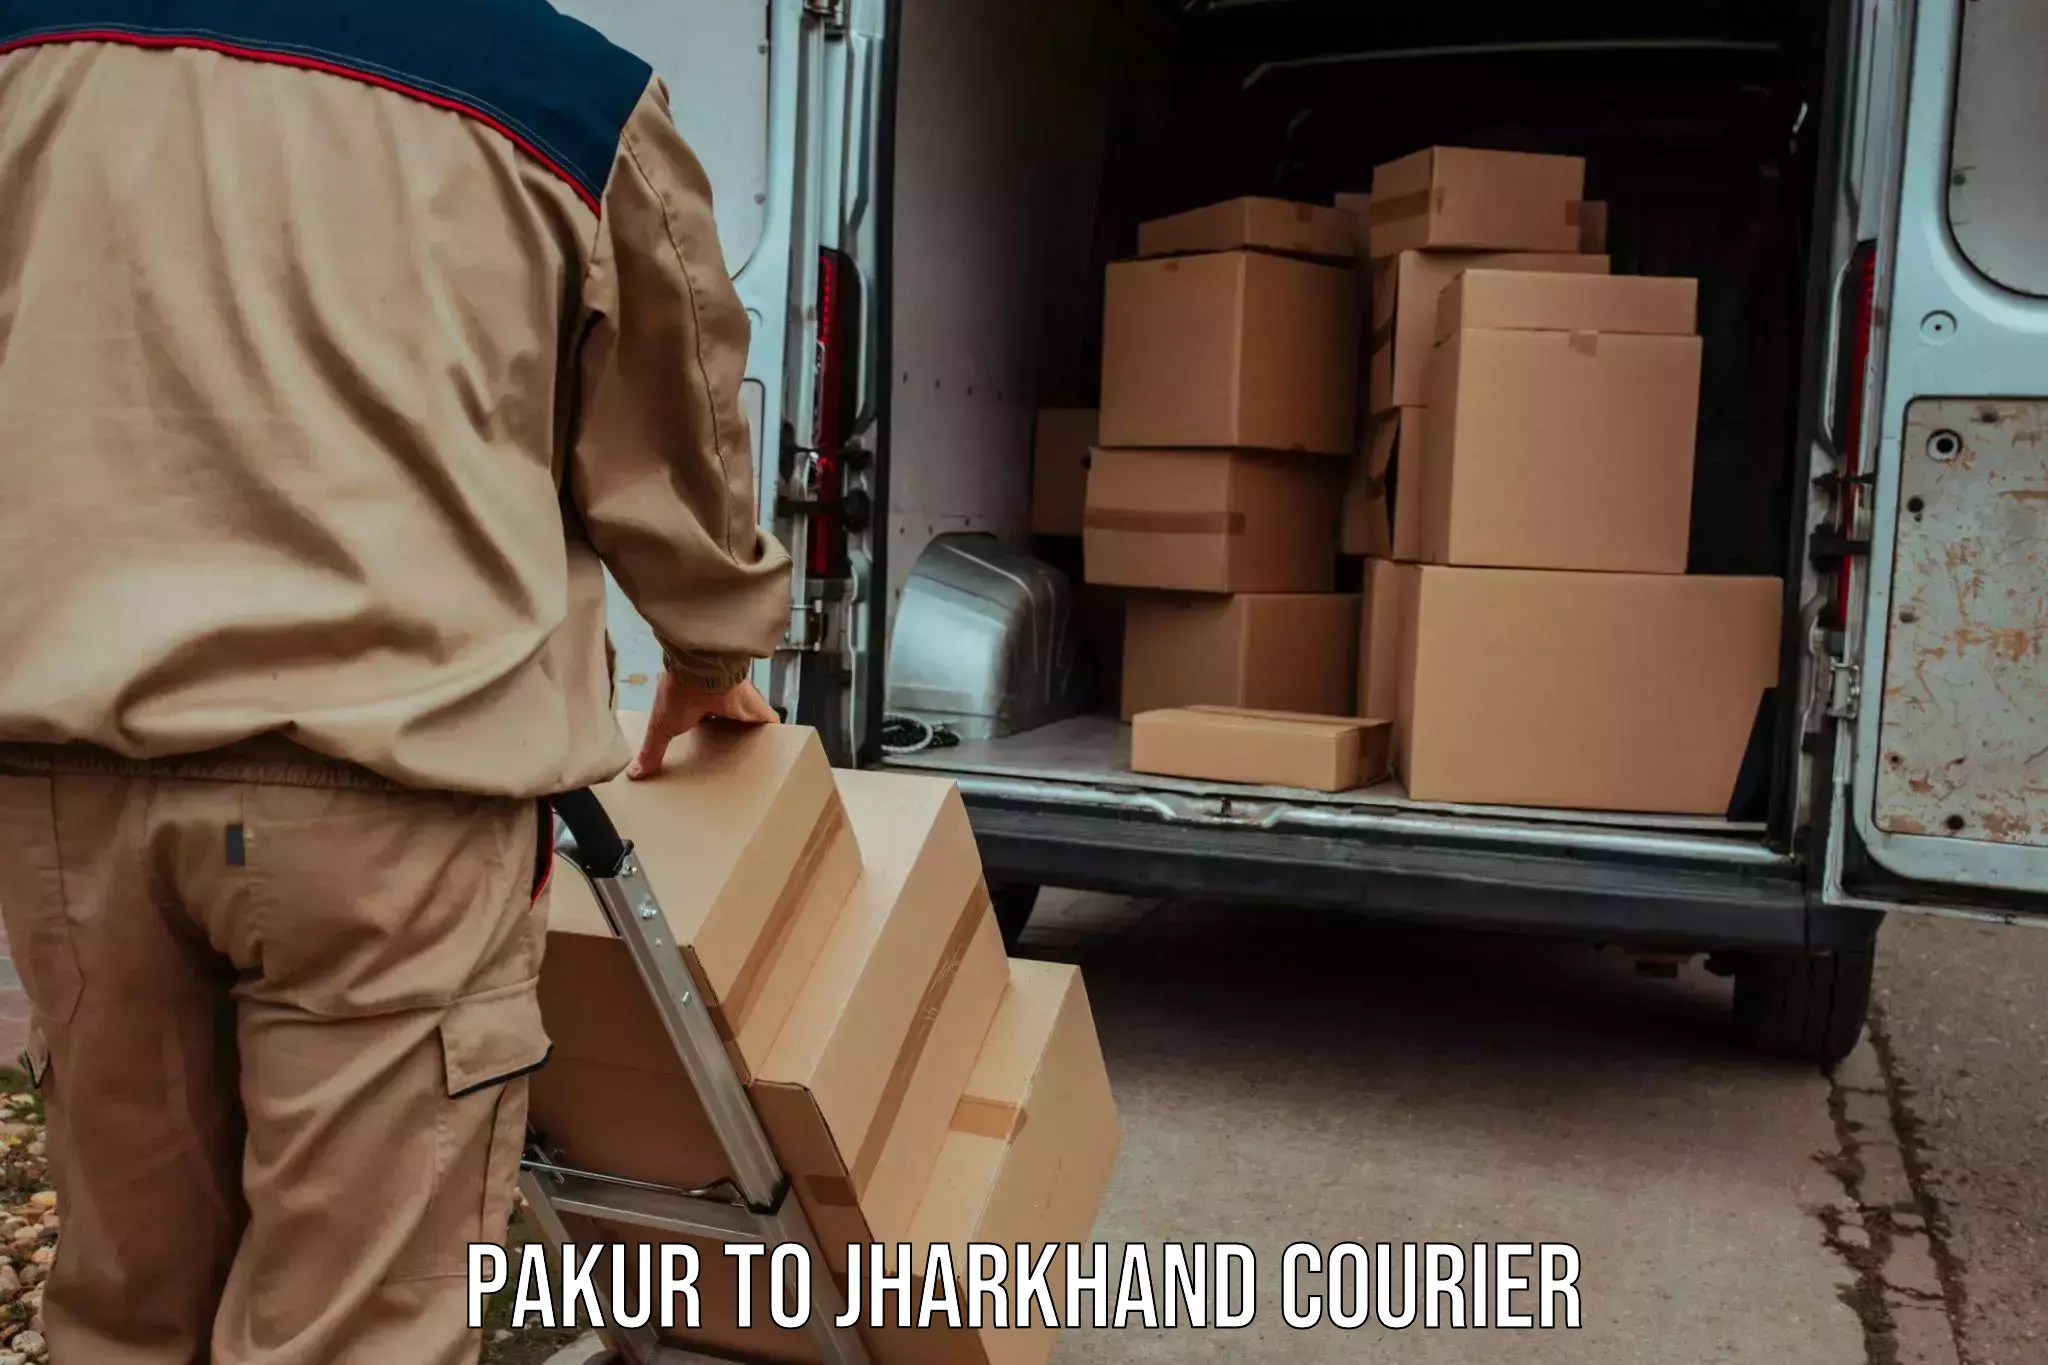 Multi-national courier services Pakur to Domchanch